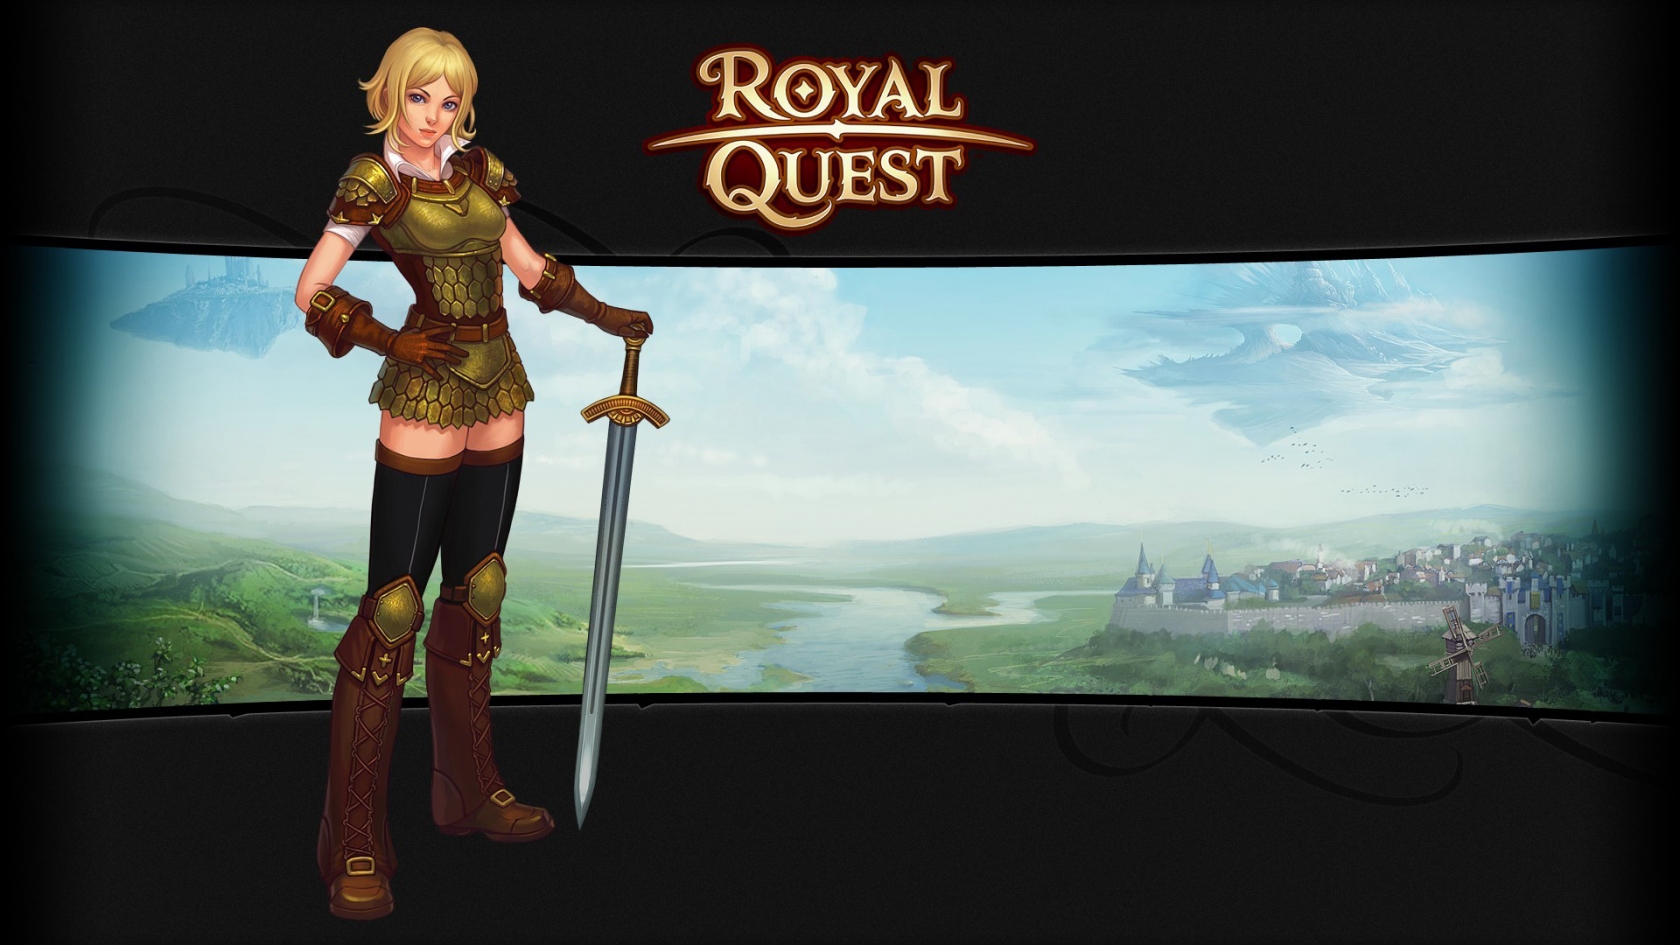 Royal Quest for 1680 x 945 HDTV resolution